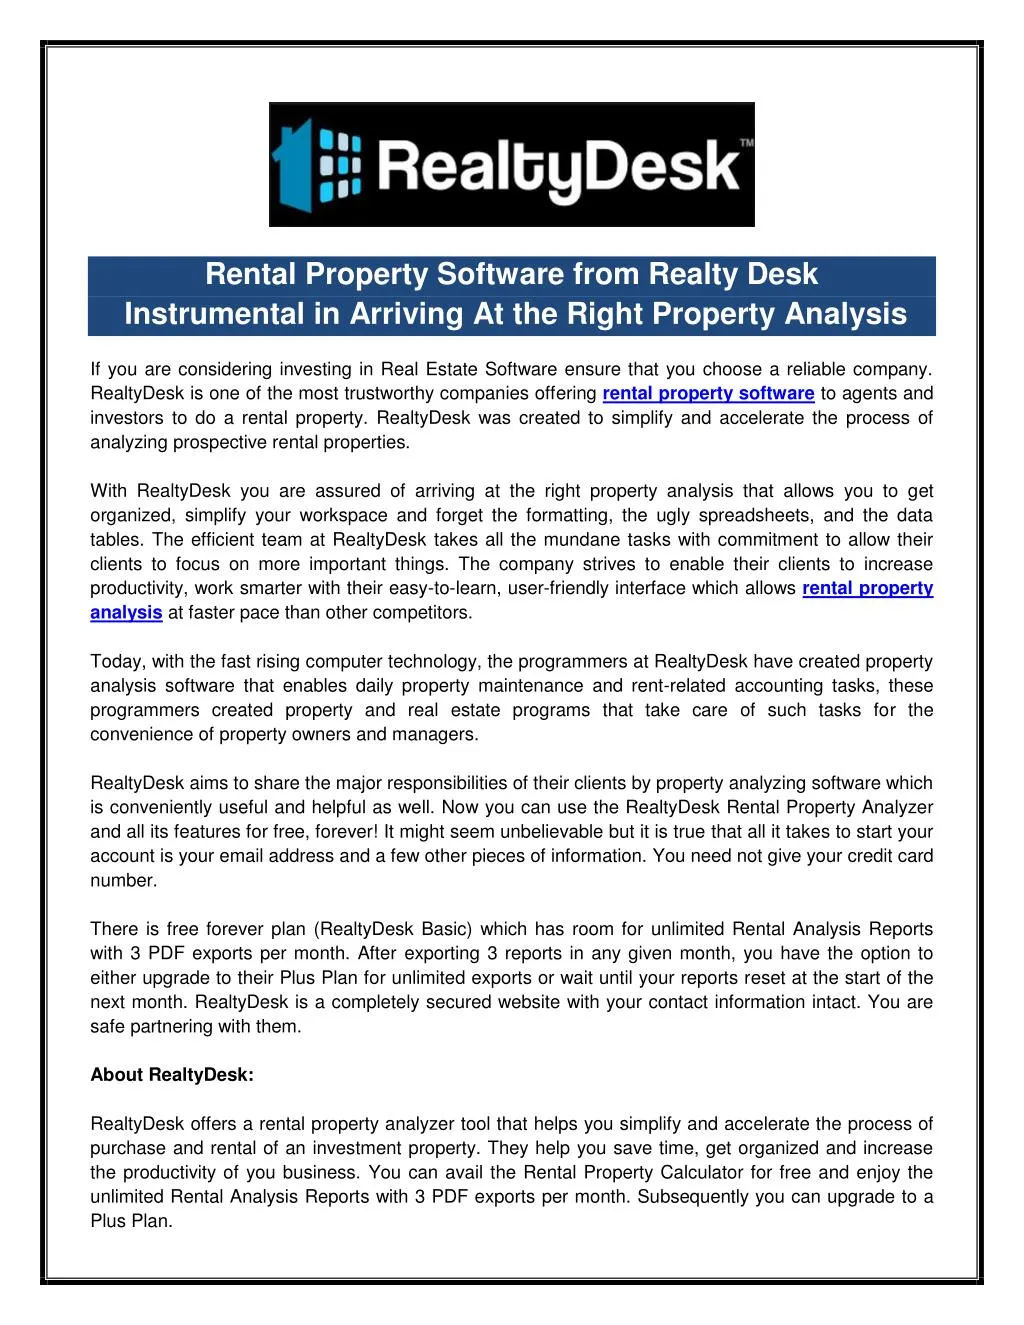 rental property software from realty desk